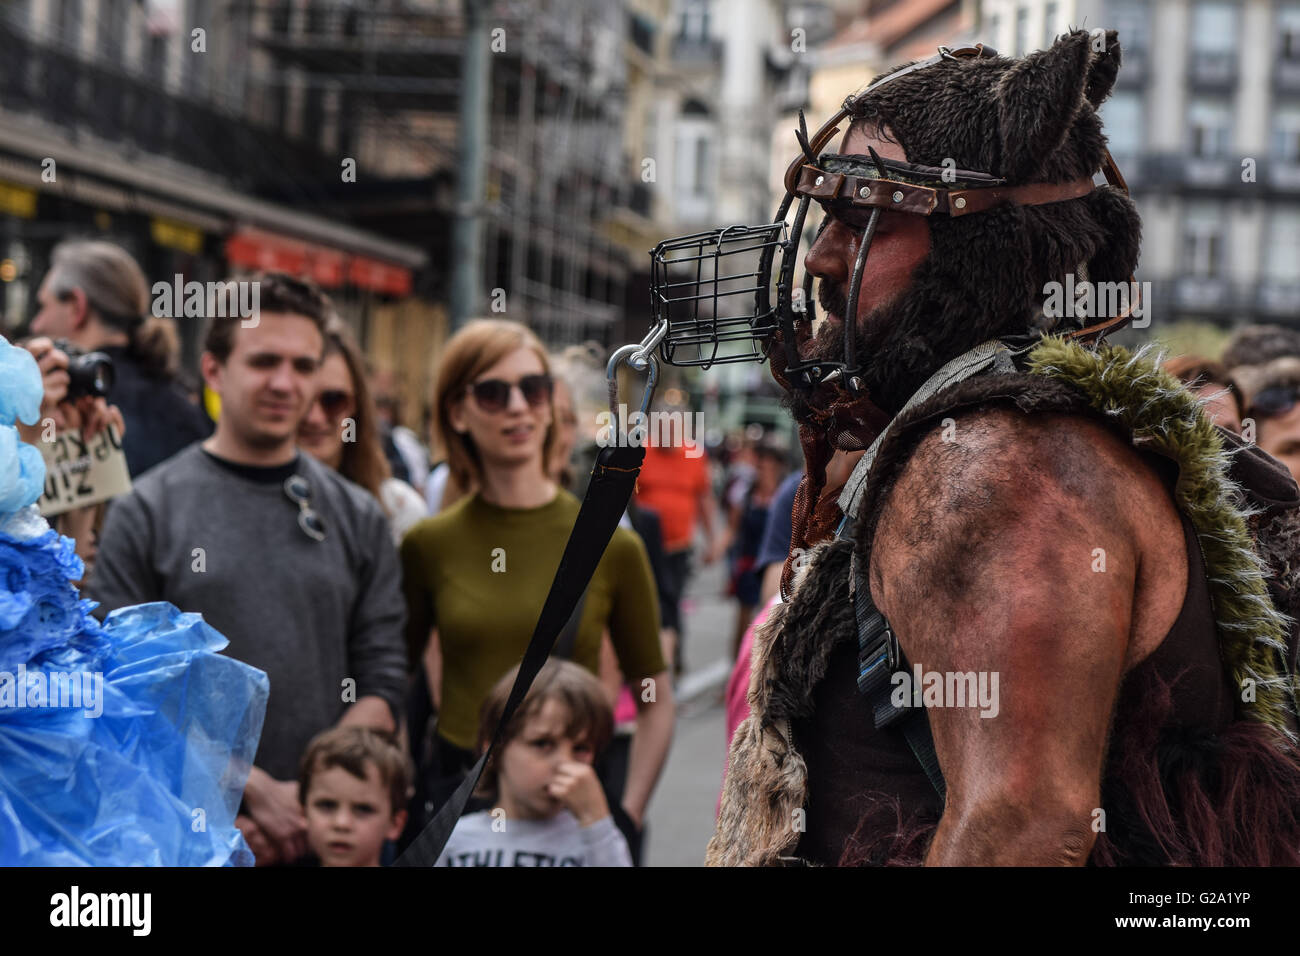 BRUSSELS, BELGIUM - MAY 21, 2016: Unidentified participant in his mystic outfit at the biennial Zinneke Parade 2016. Stock Photo